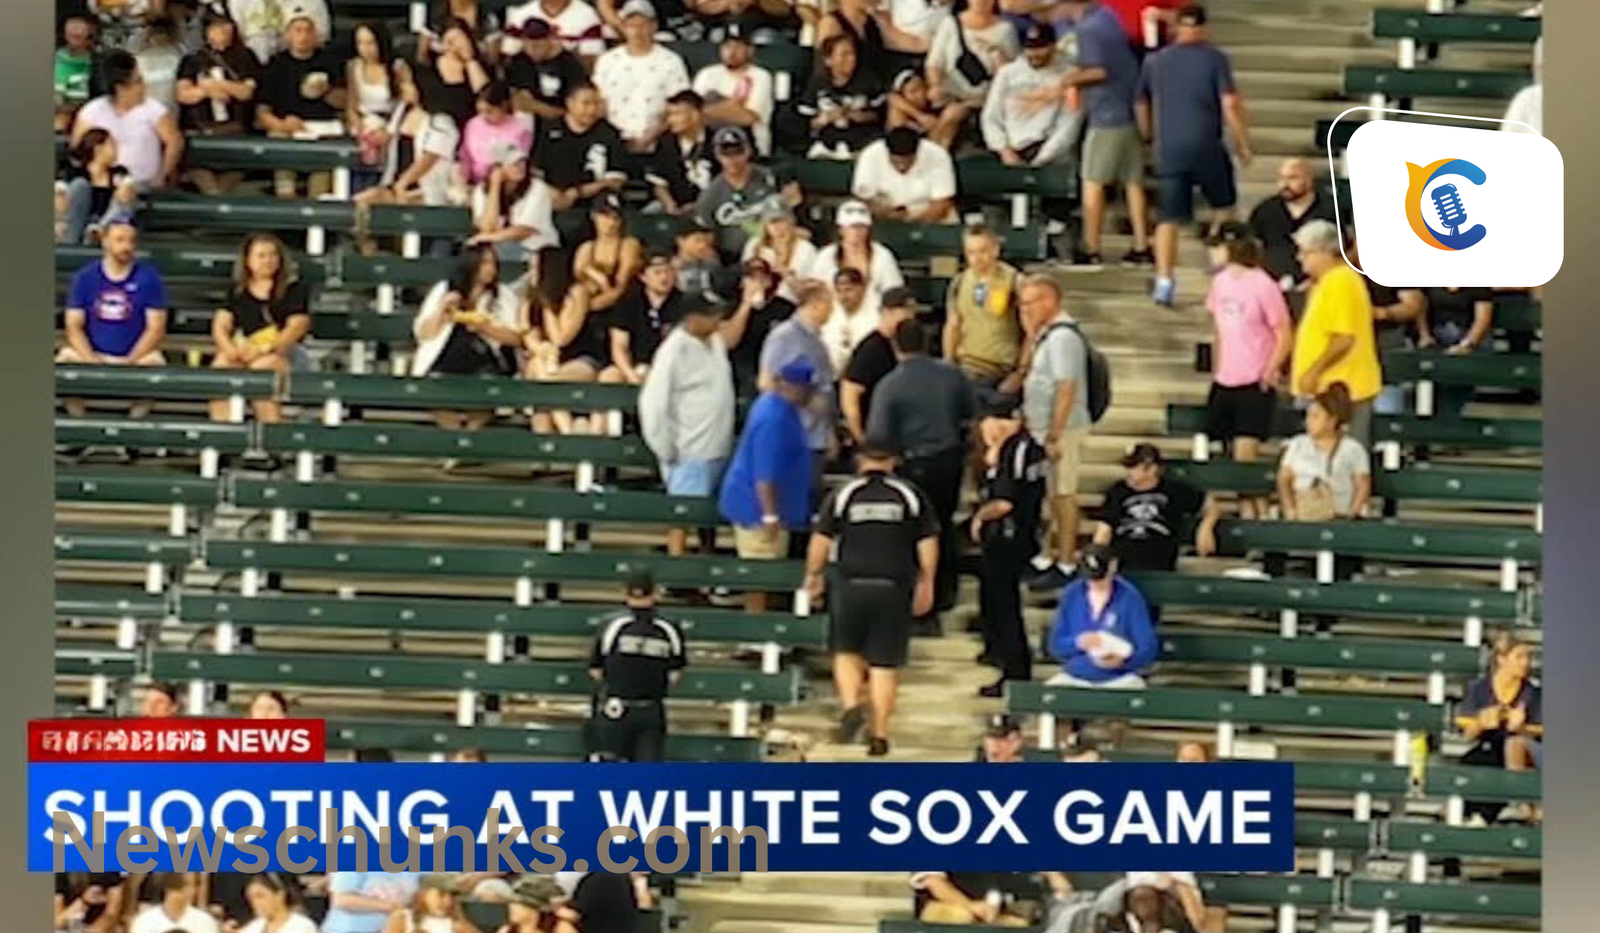 Shooting incident at White Sox ballpark during game